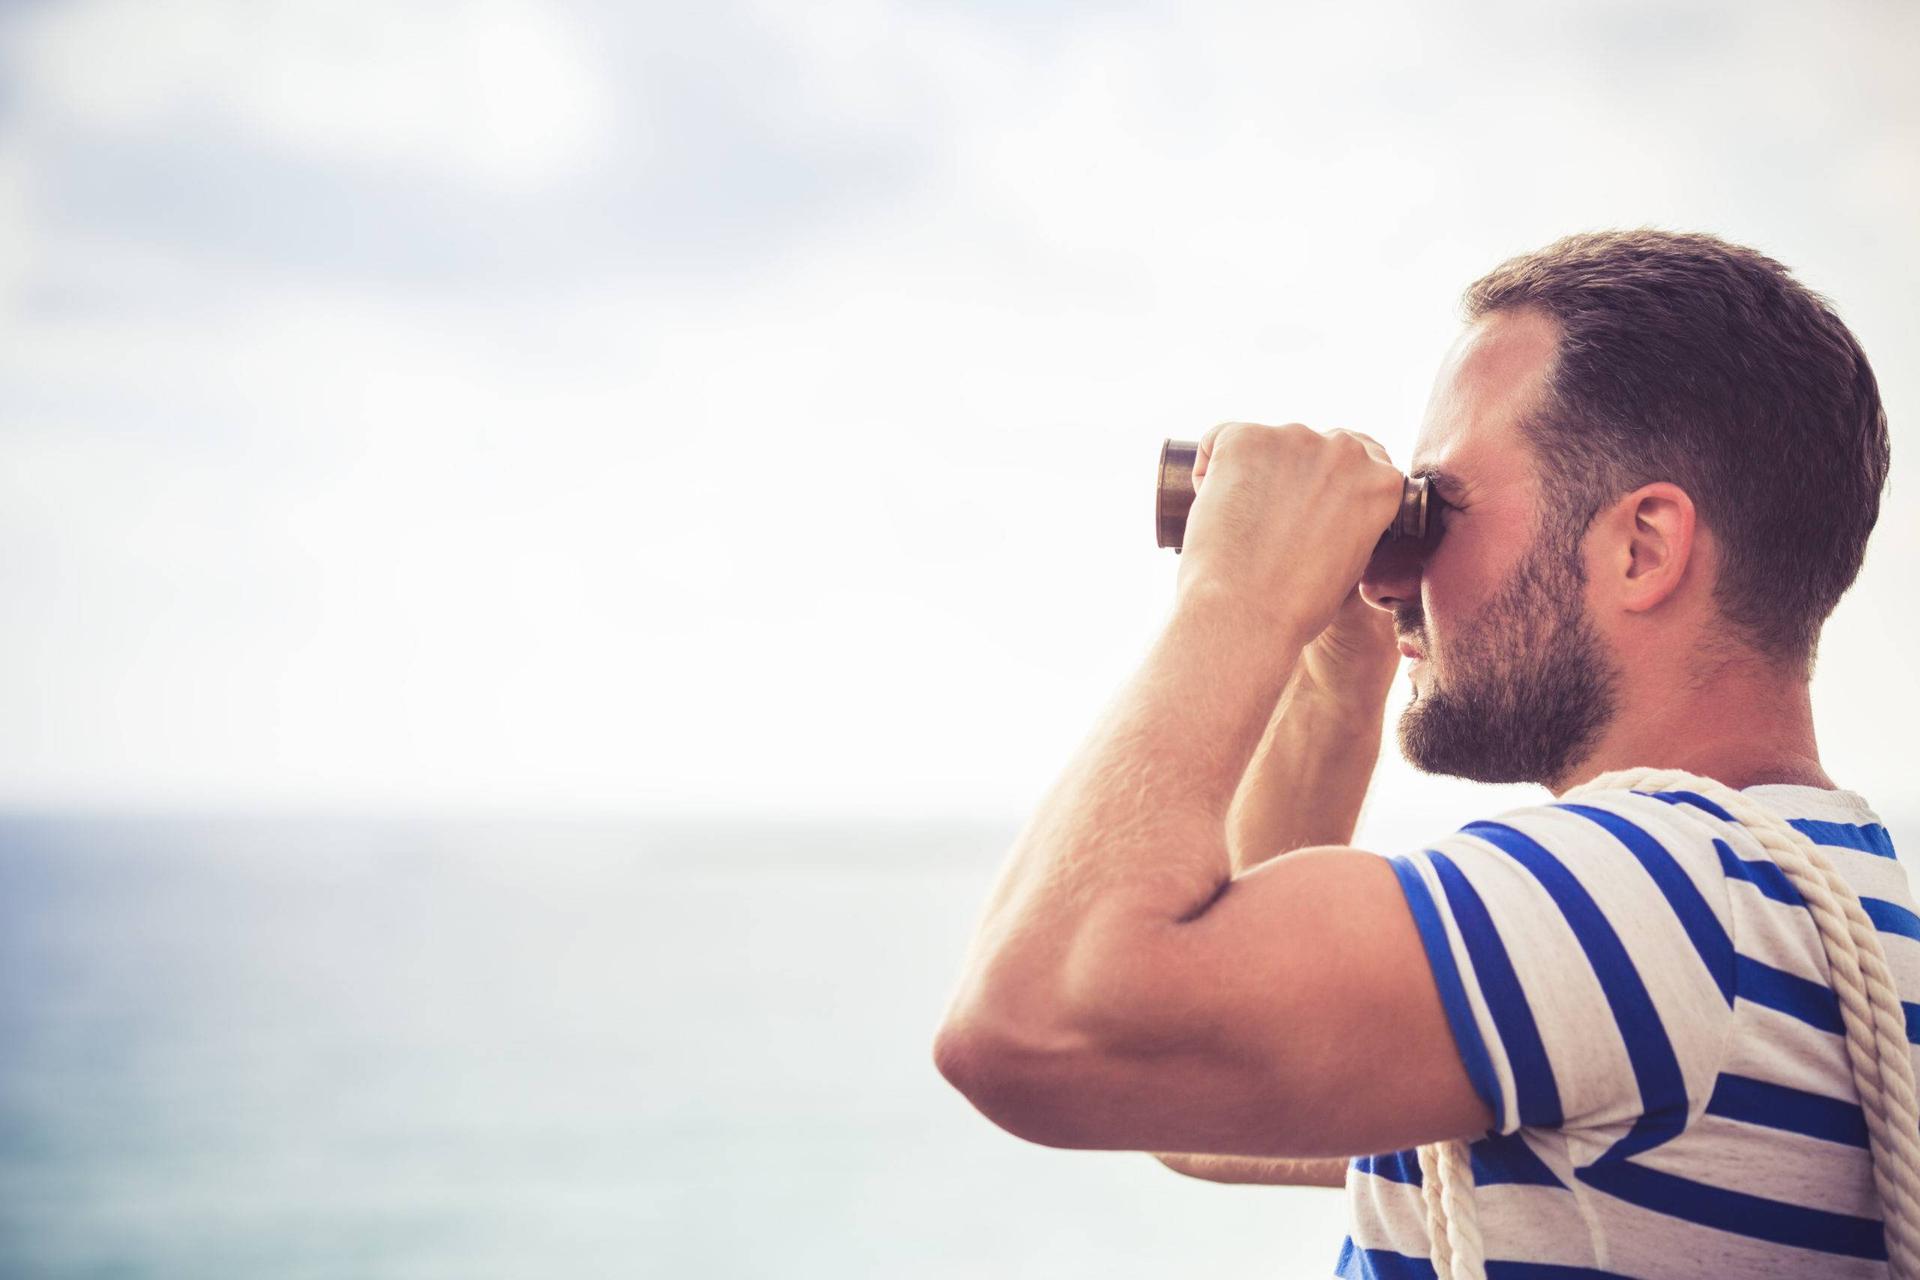 A man in a blue and white-striped shirt looks through binoculars at the open sea